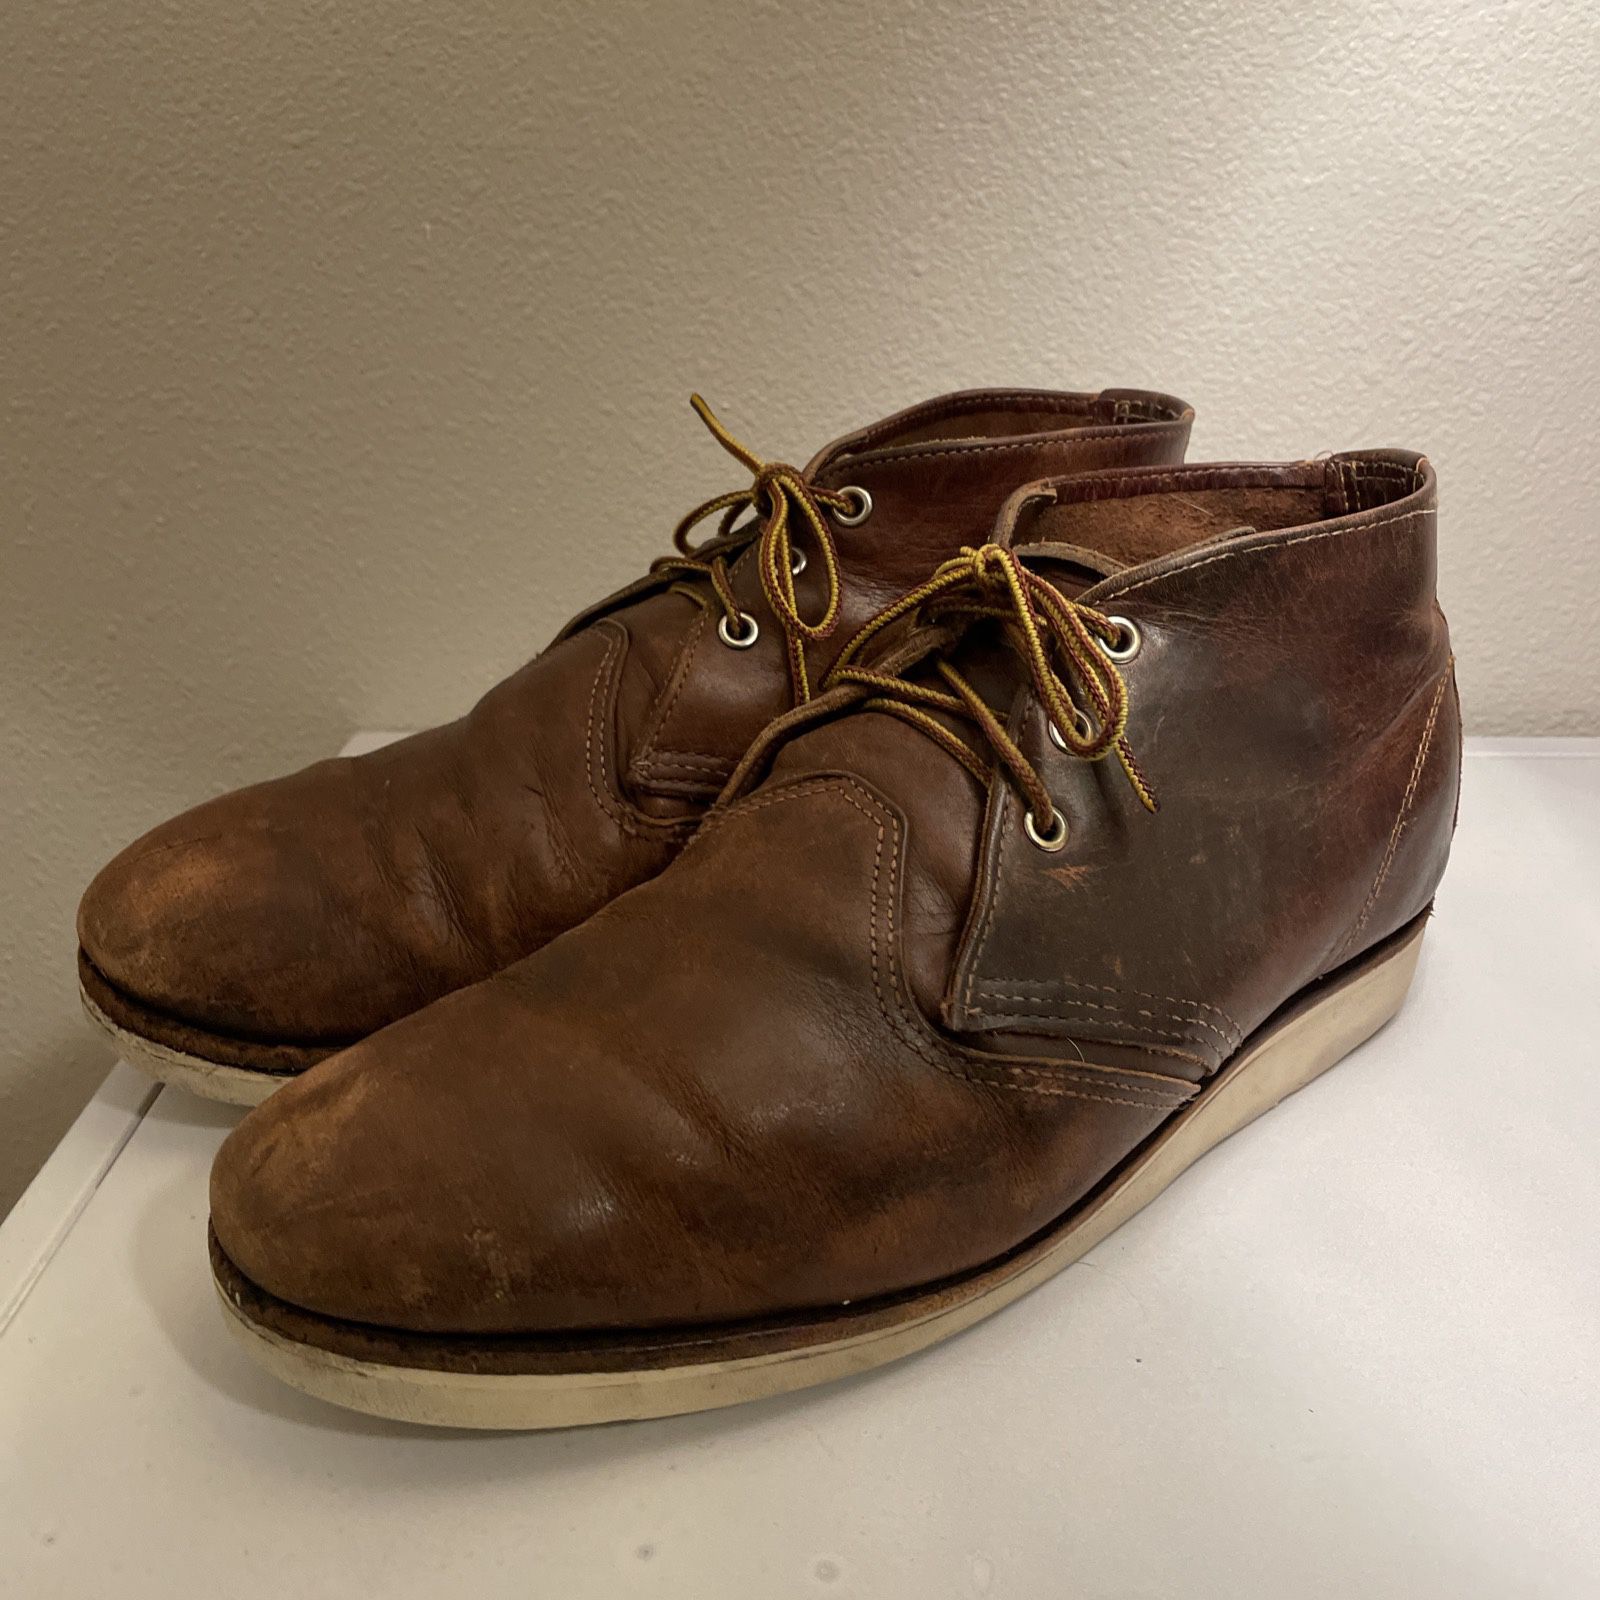 Red Wing Heritage 3141 Work Chukka Leather Brown Boots Made USA Sz US 11.5 D